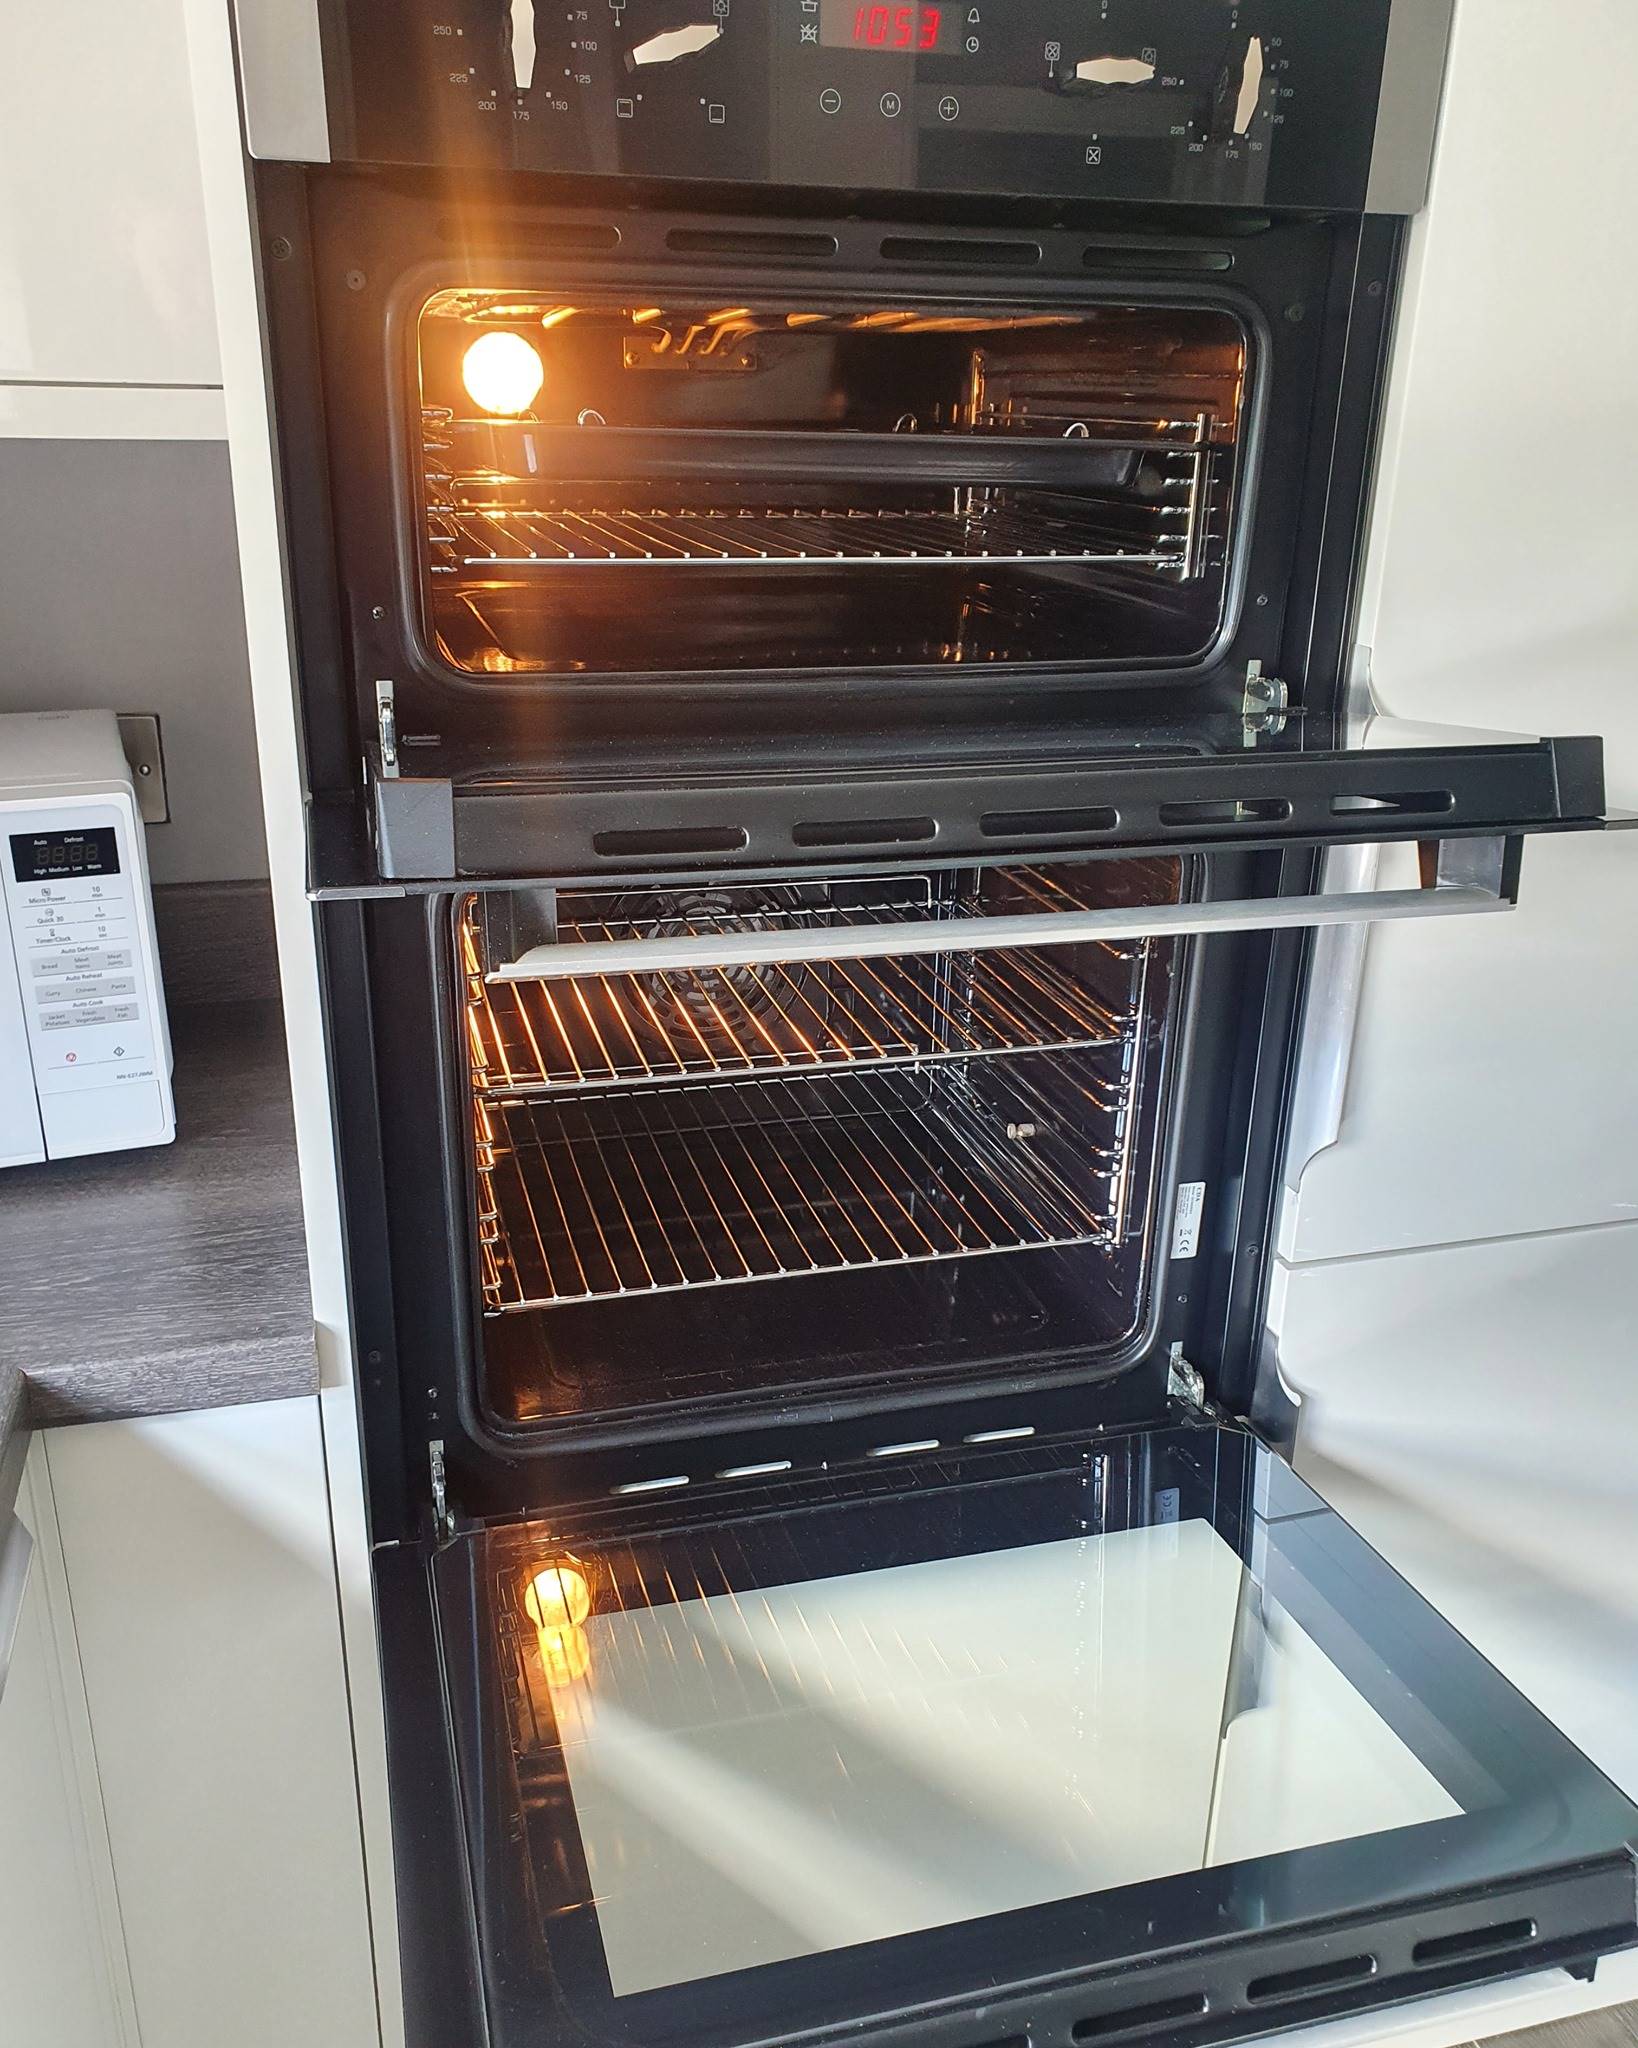 Oven and grill cleaning Belfast & Lisburn | Clean Oven Belfast | Oven Cleaning NI | Oven Clean ni | Kitchen Cleaning NI | Oven Cleaning Belfast | Kitchen Appliance Cleaning Belfast | Oven Clean NI